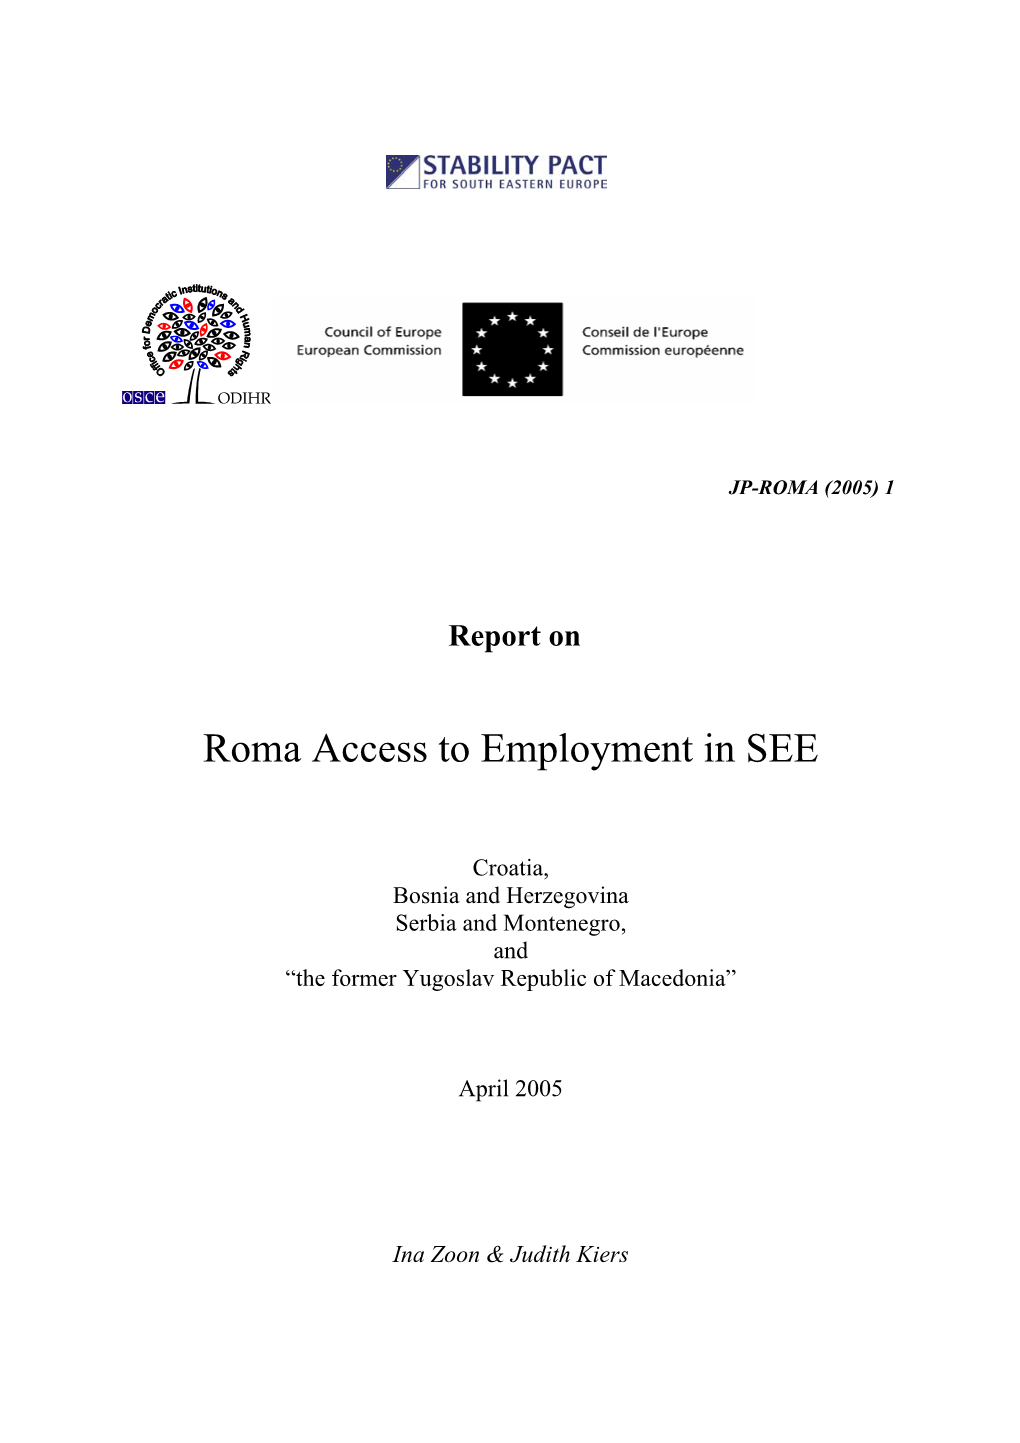 Roma Access to Employment in SEE